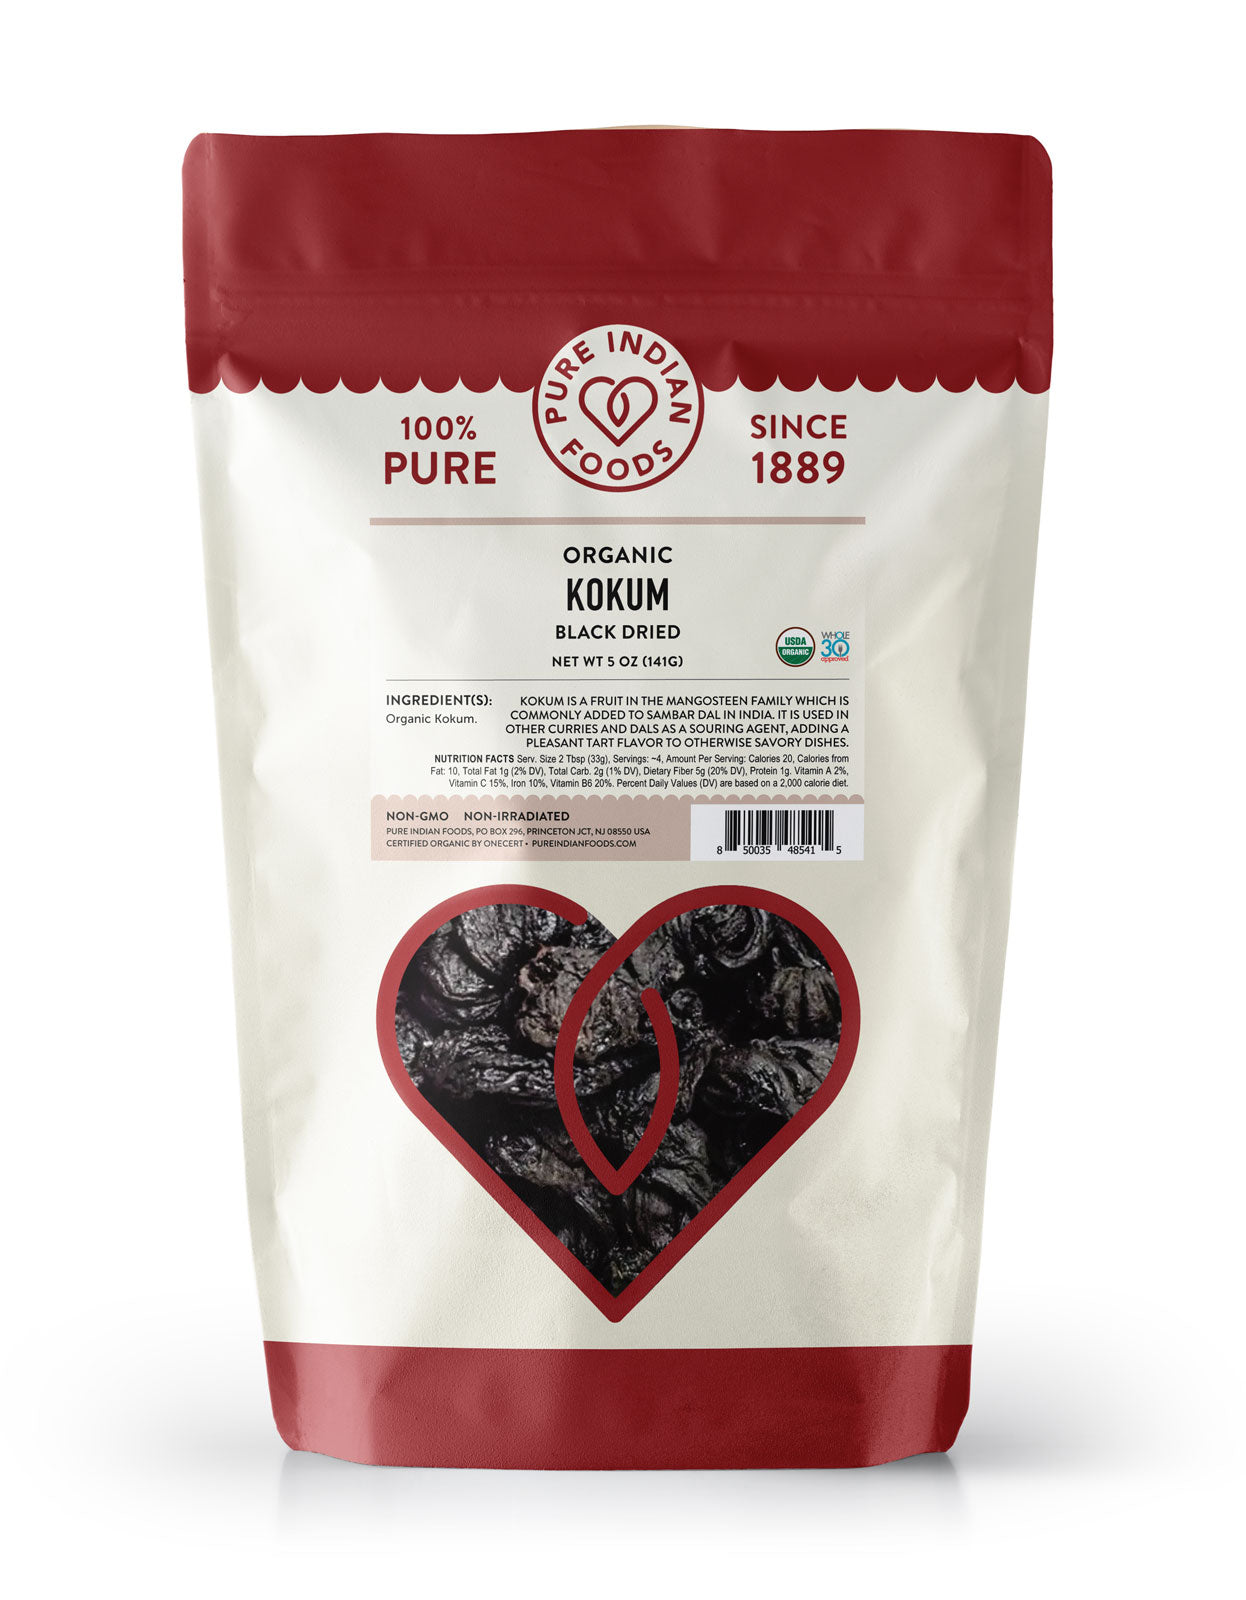 1 bag of dried, black Kokum pieces from Pure Indian Foods. Certified Organic.